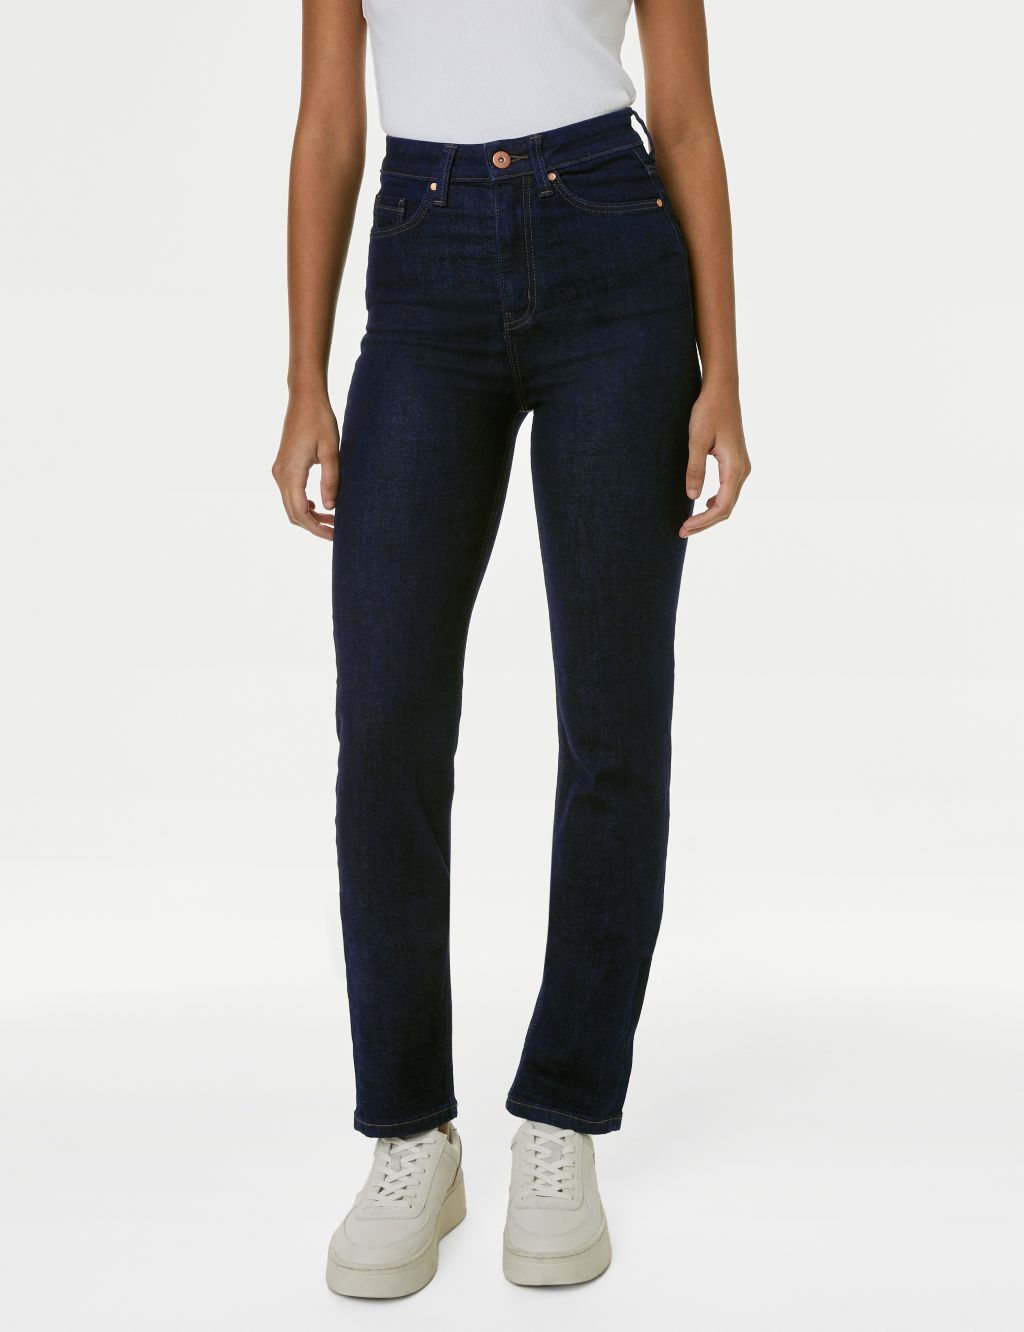 Sienna Supersoft Straight Leg Jeans image 2